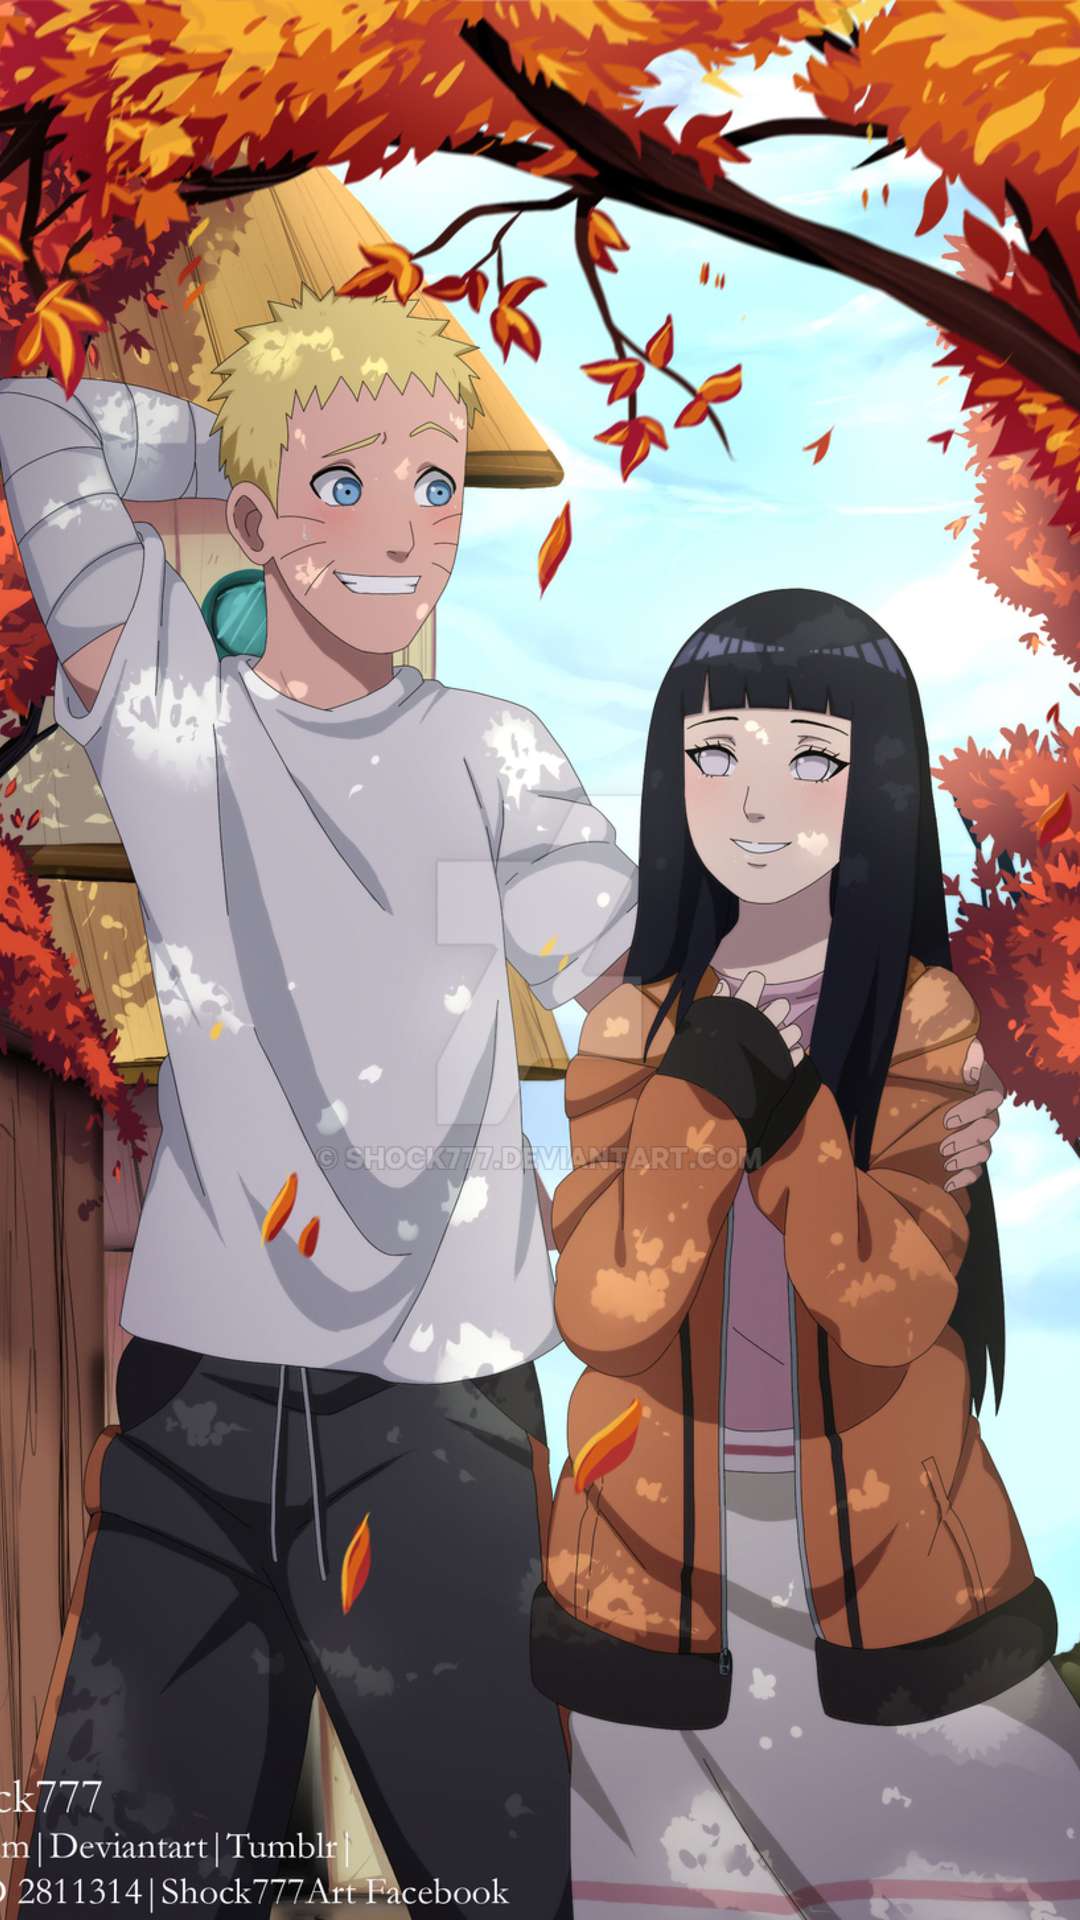 54+ Hinata Hyuga Wallpapers for iPhone and Android by Benjamin Orozco DDS